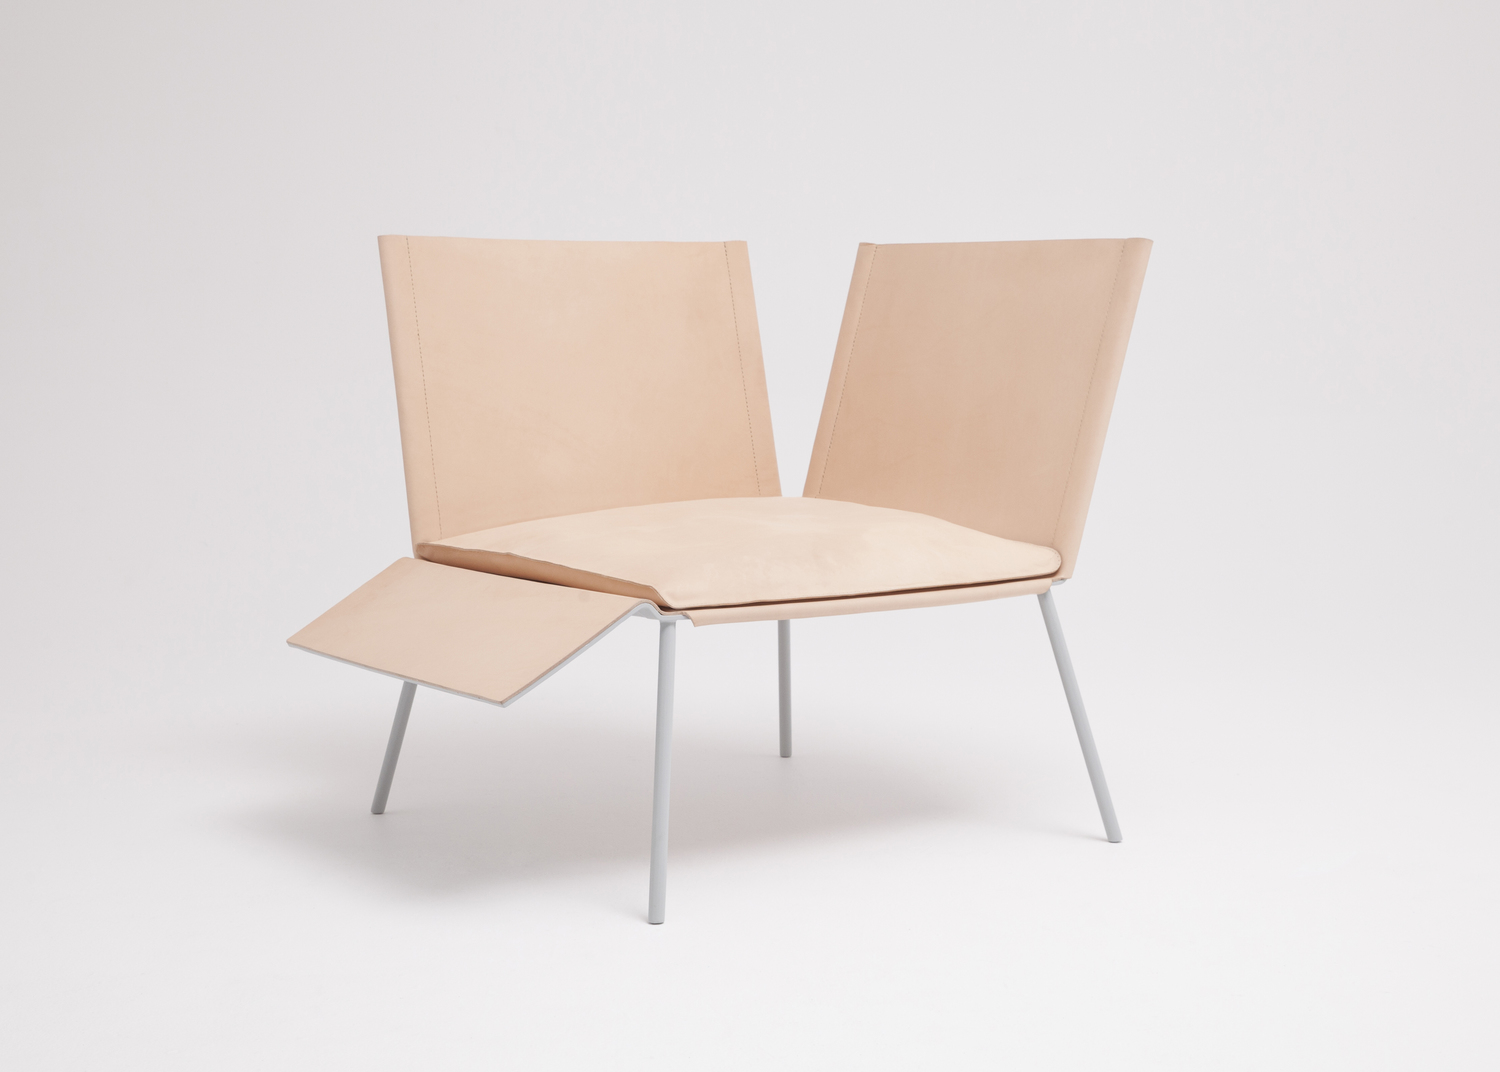 Saddle Chair by Thom Fougere